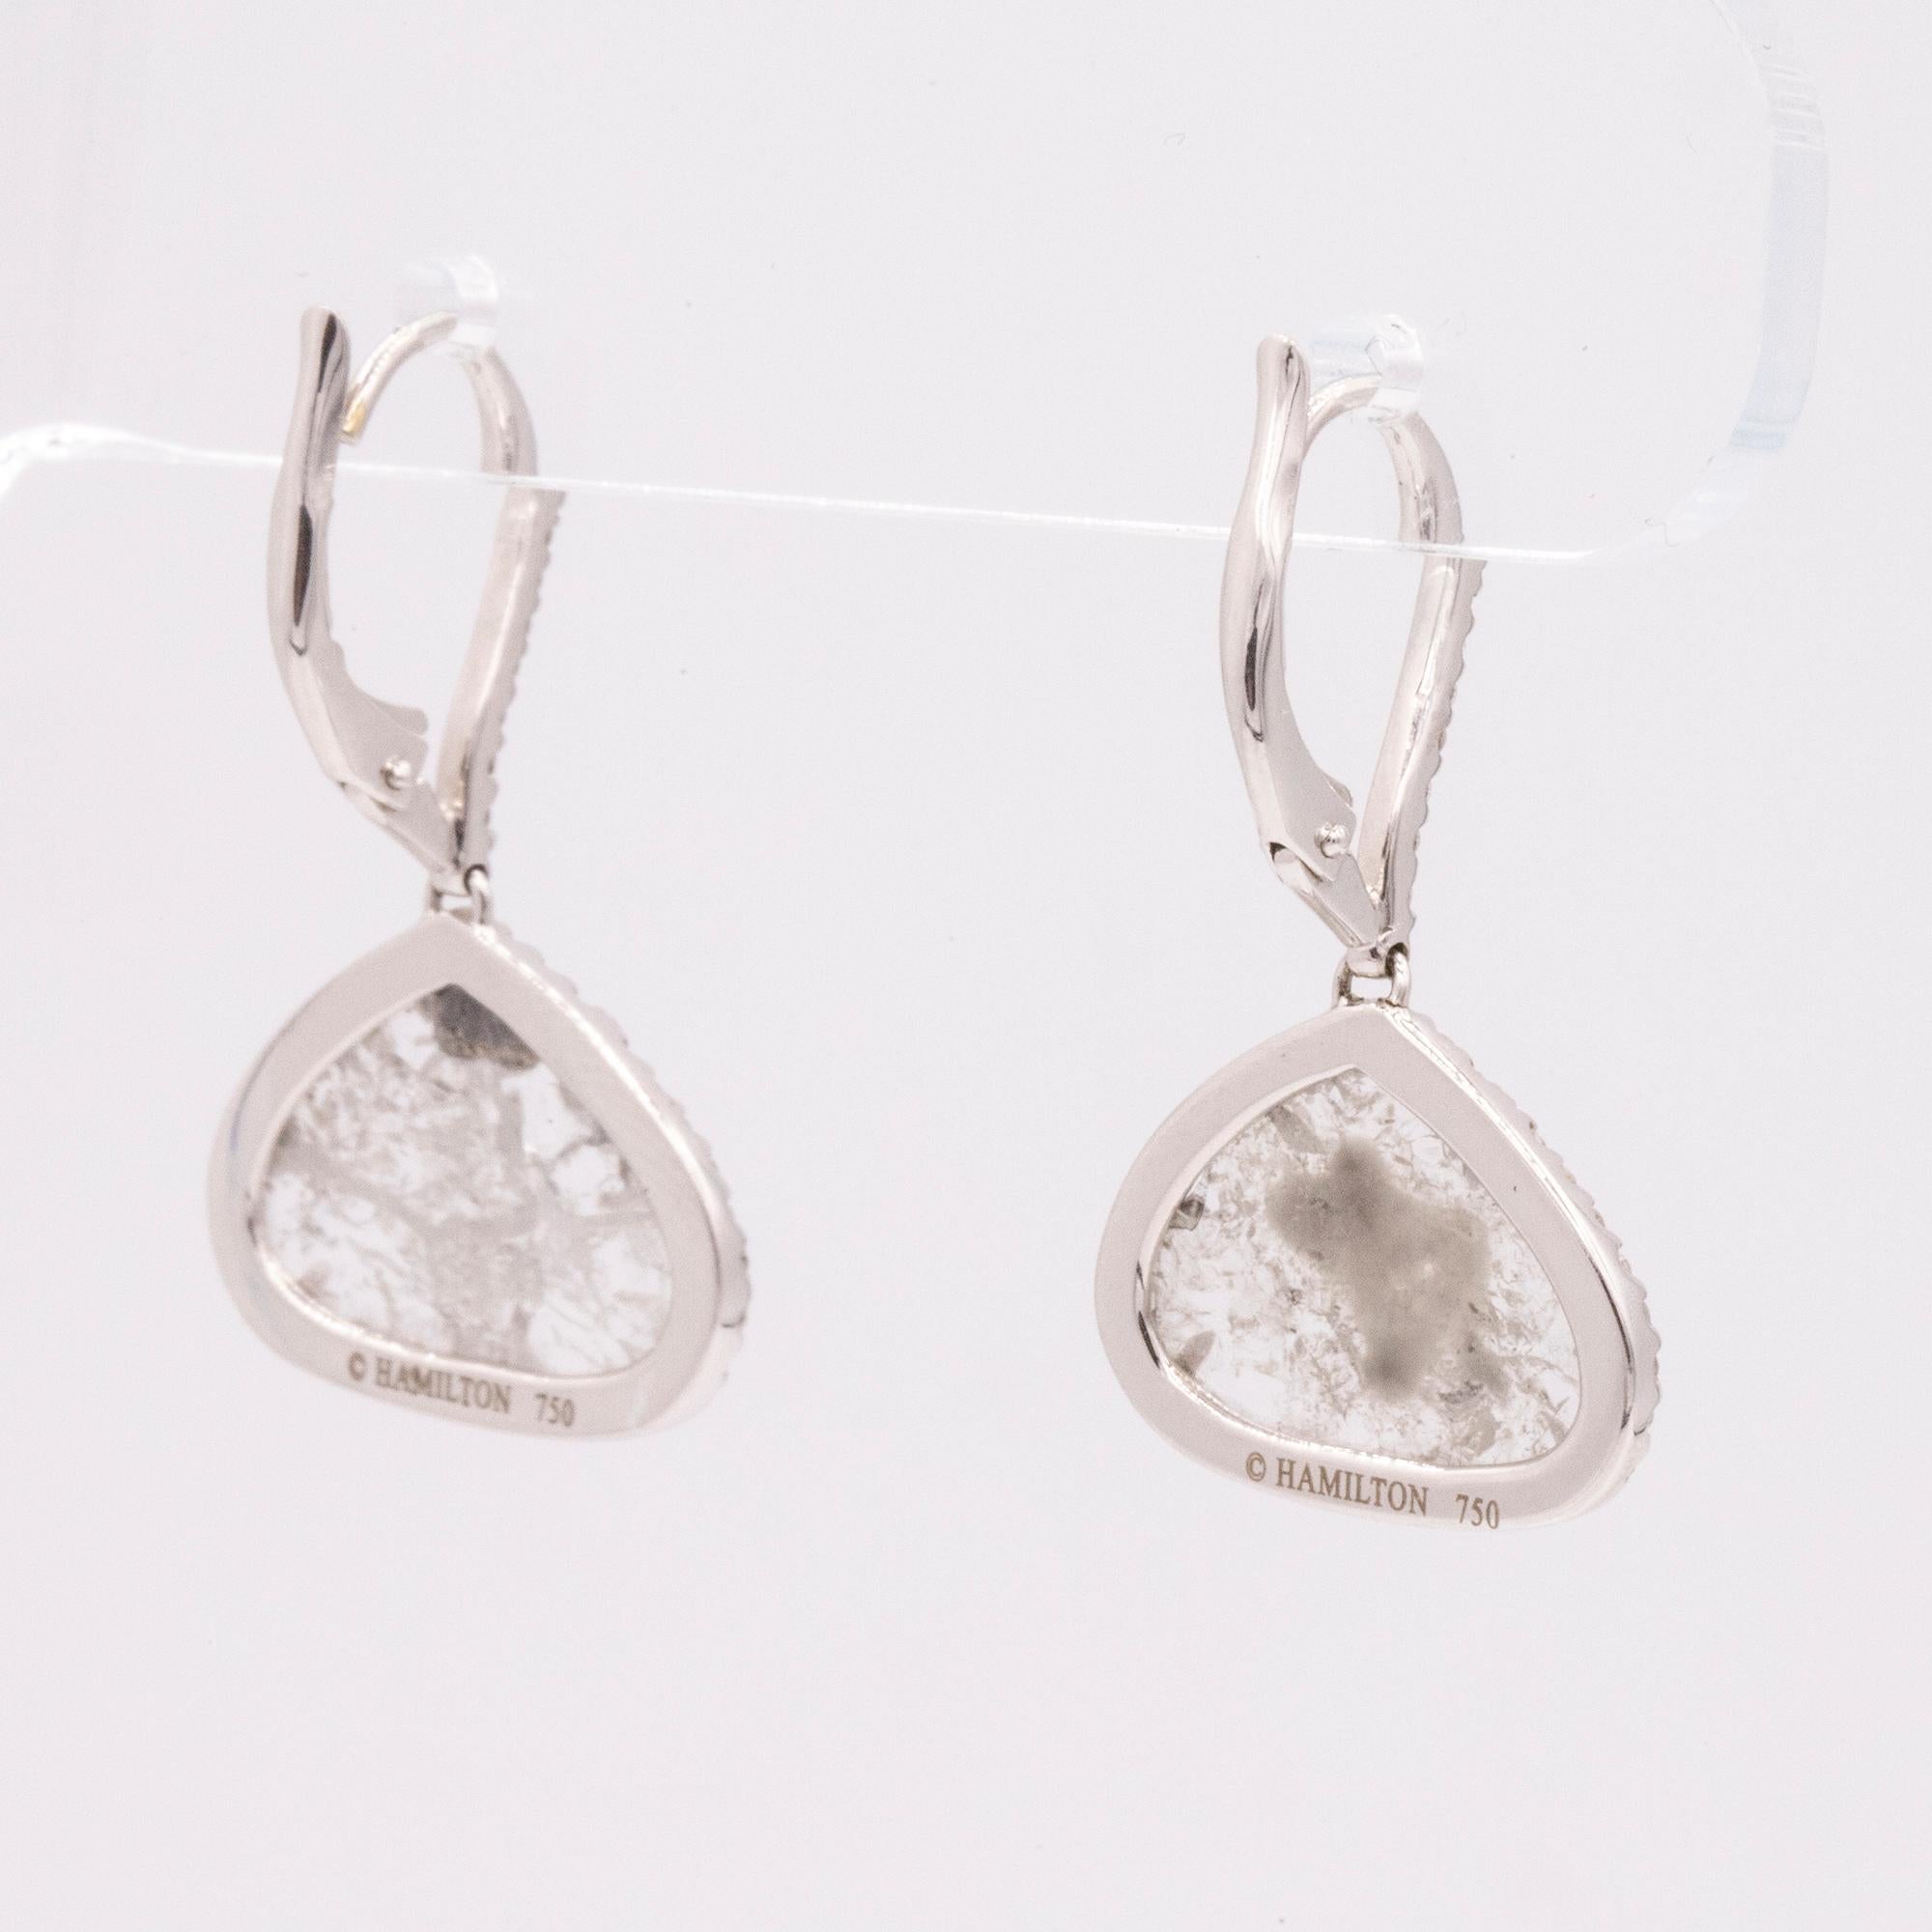 These beautiful handmade drop earrings feature two diamond slices that weigh 2.97 carats total. Accented with 74 pave set round diamonds that are also on the front on the ear wire, weighing .38cts total. G color and VS clarity. Crafted in 18k white